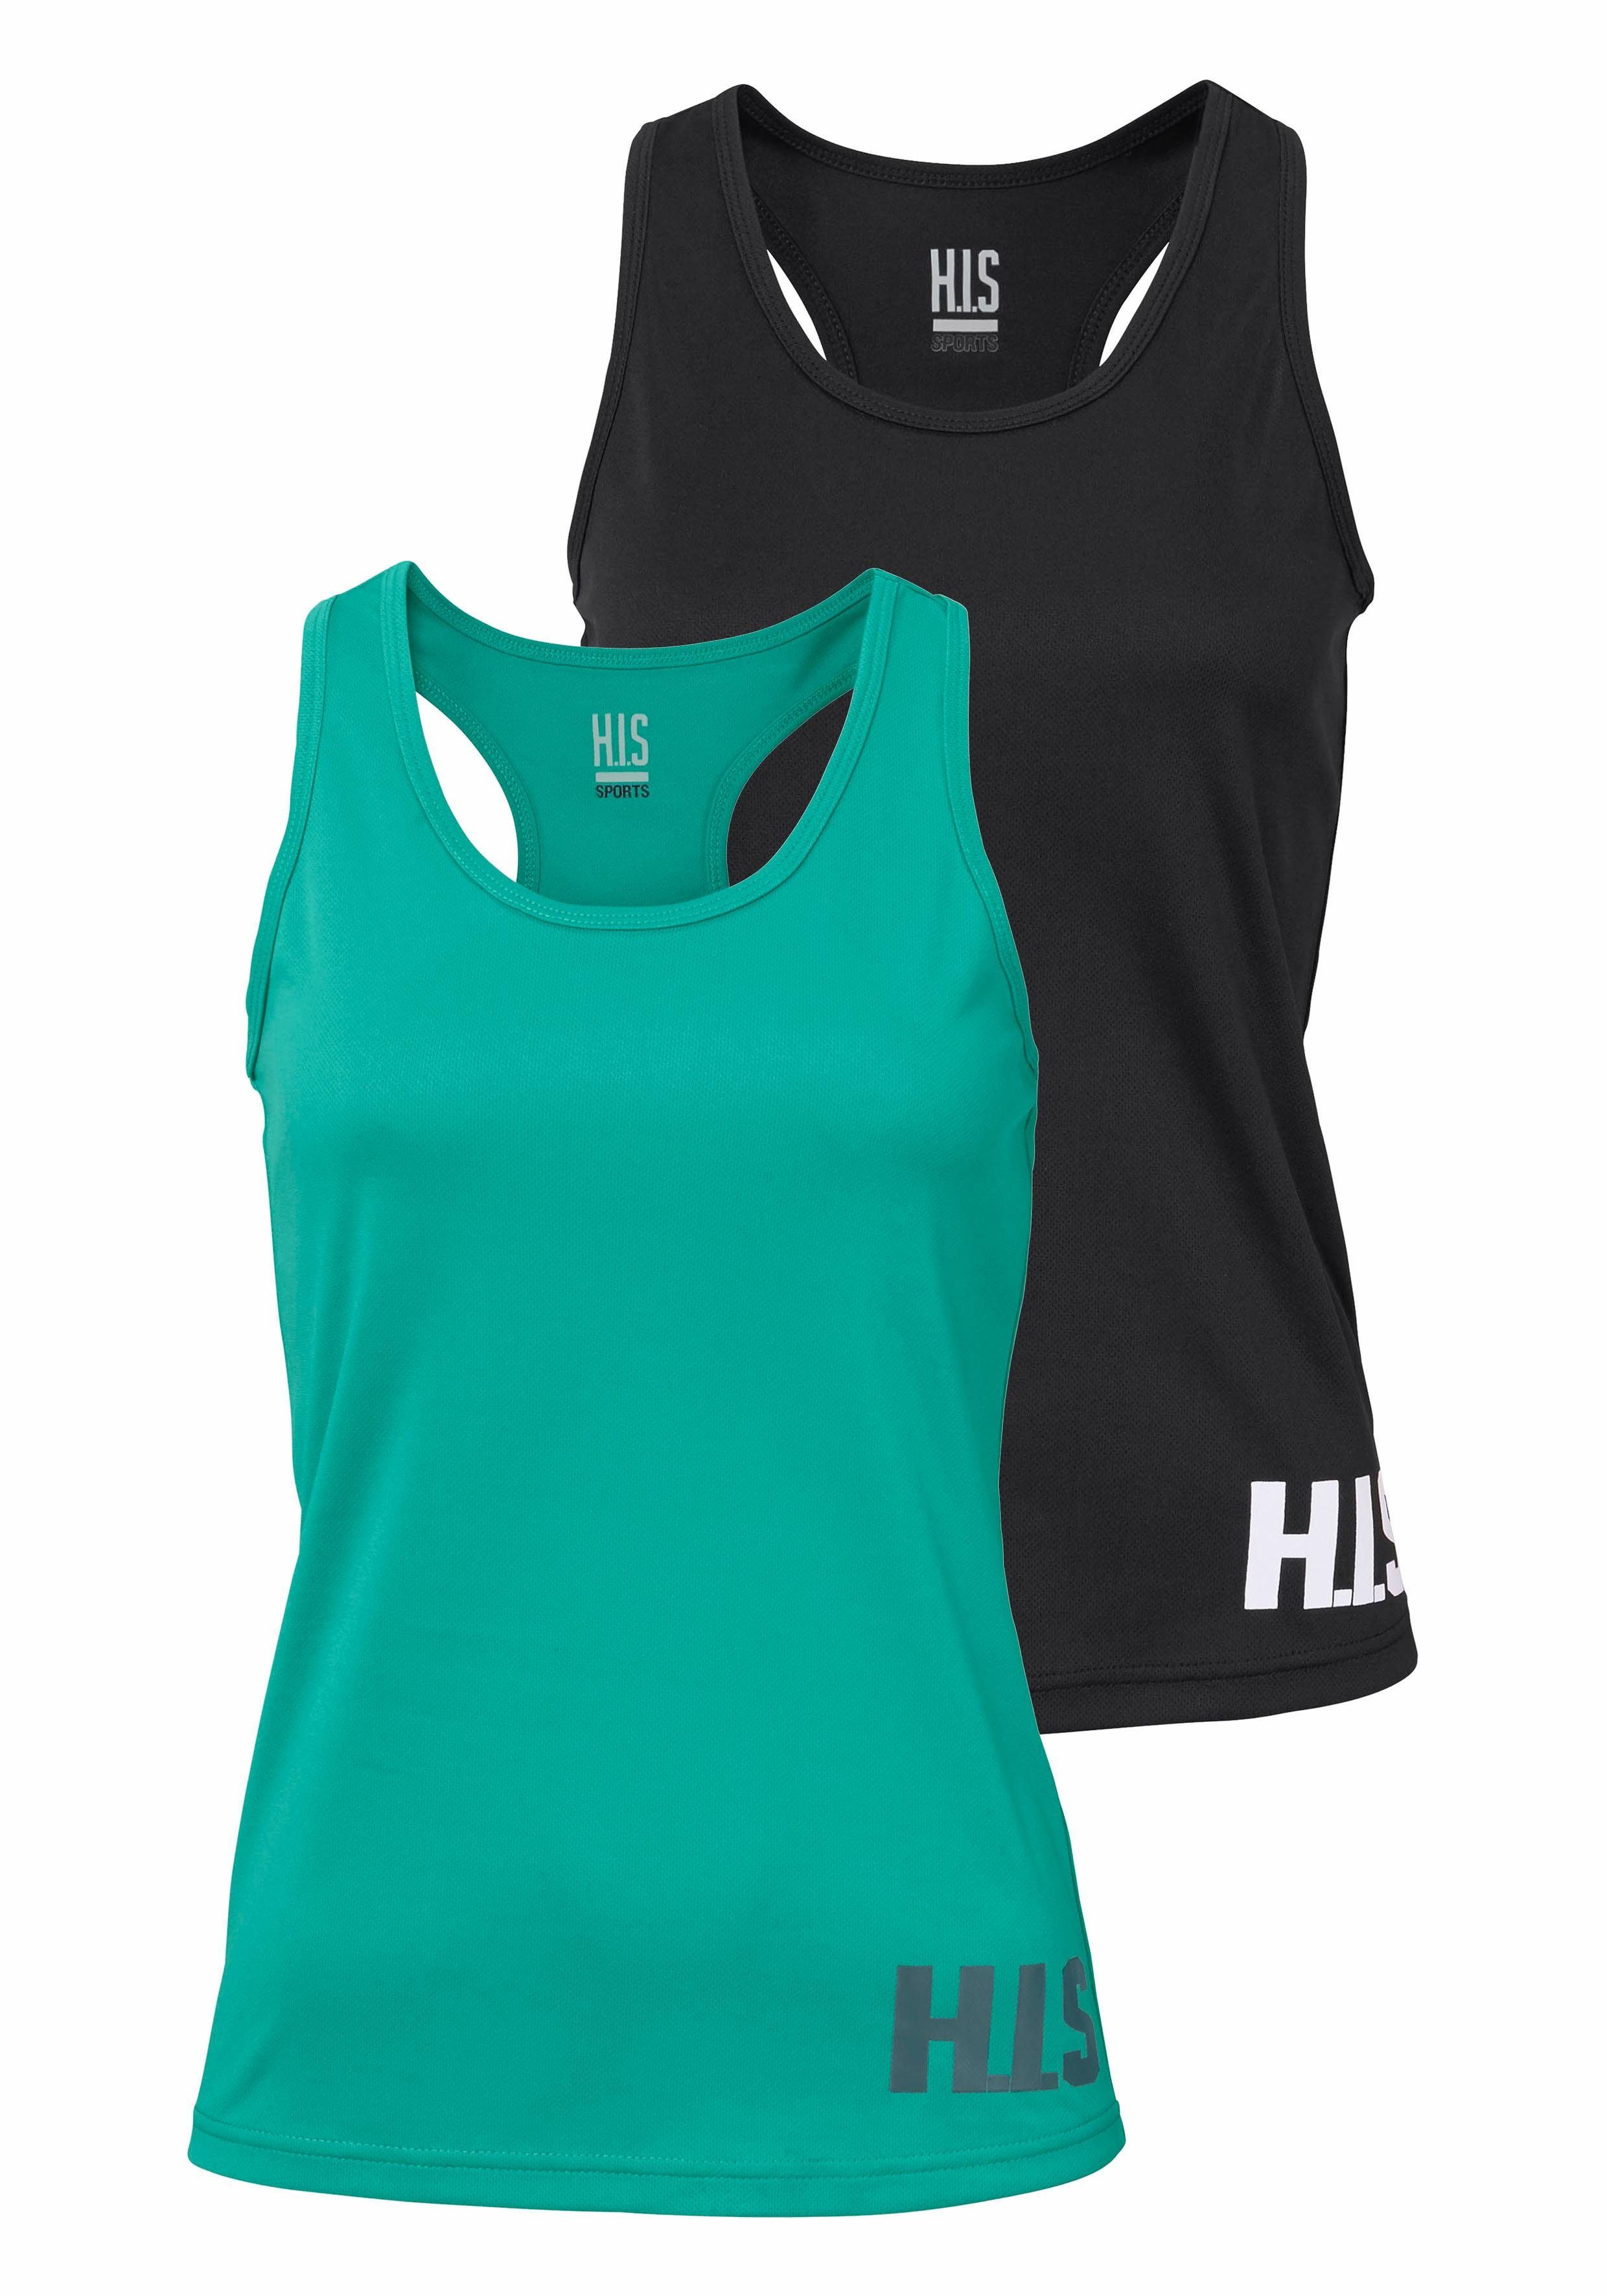 Otto - H.I.S NU 15% KORTING: H.I.S functionele top